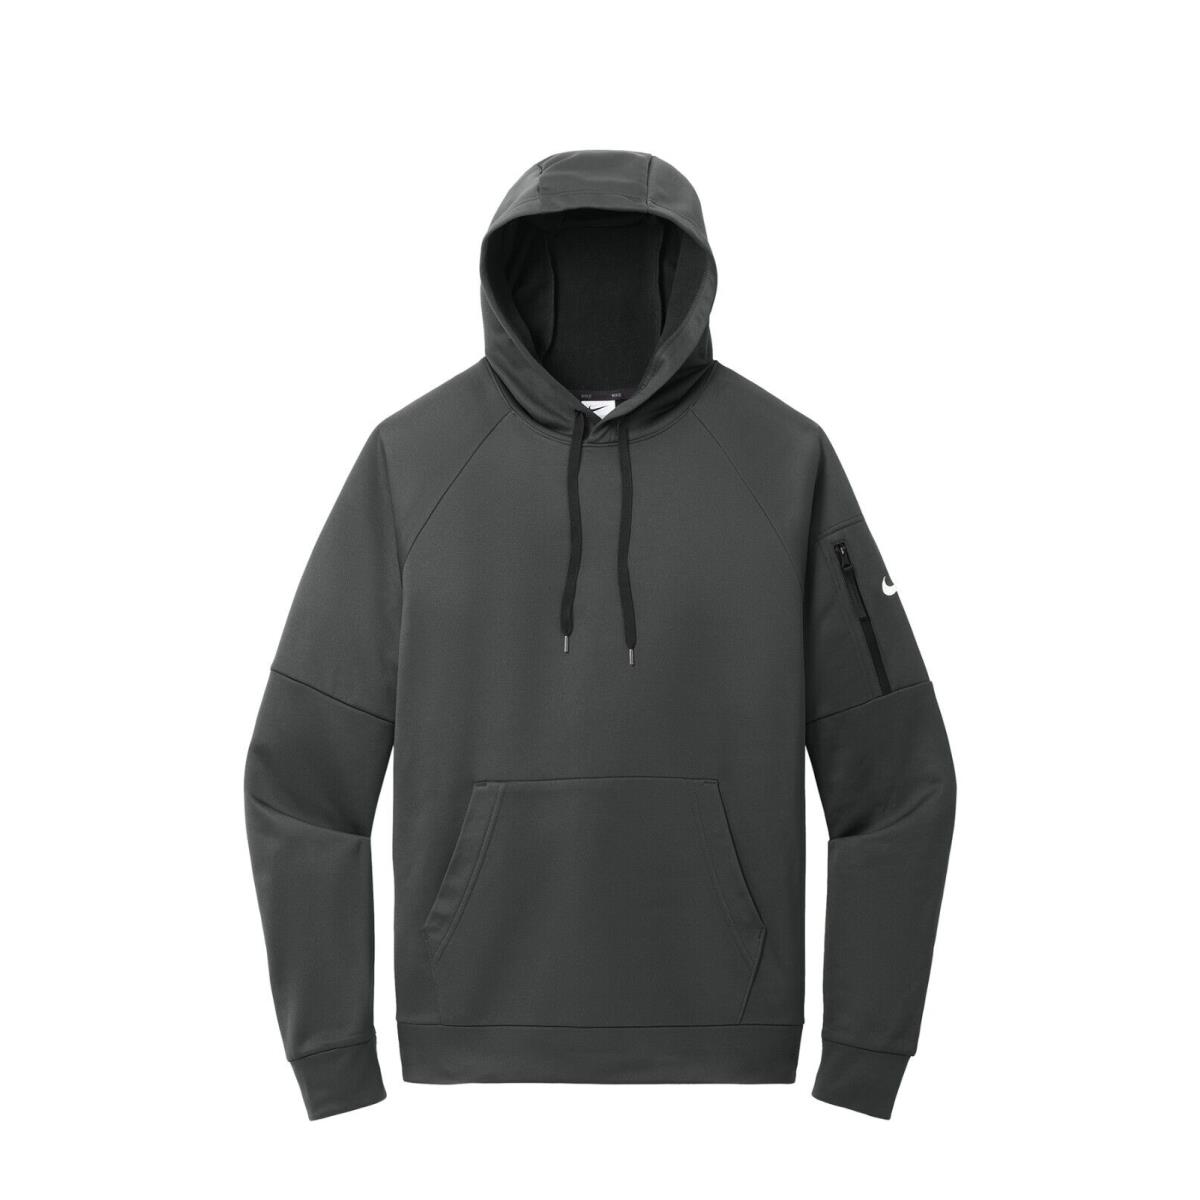 Nike Men`s Therma-fit Fleece Pullover Hoodie Drawcord Hood Arm Pocket XS-4XL Anthracite Grey